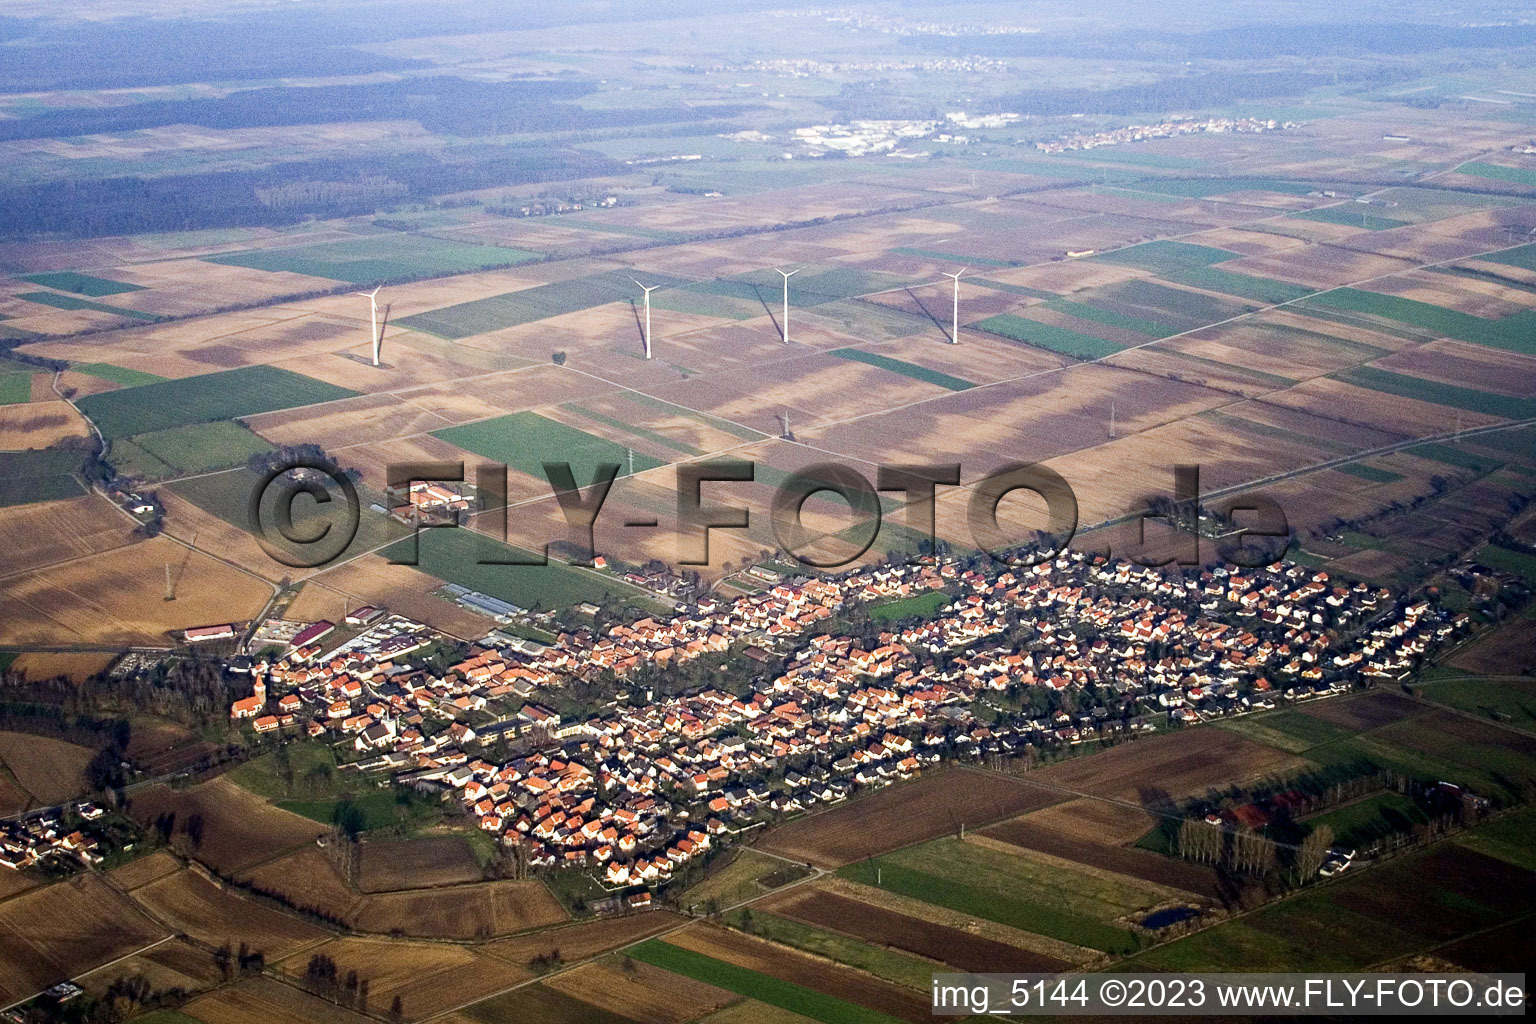 From the south in Minfeld in the state Rhineland-Palatinate, Germany out of the air